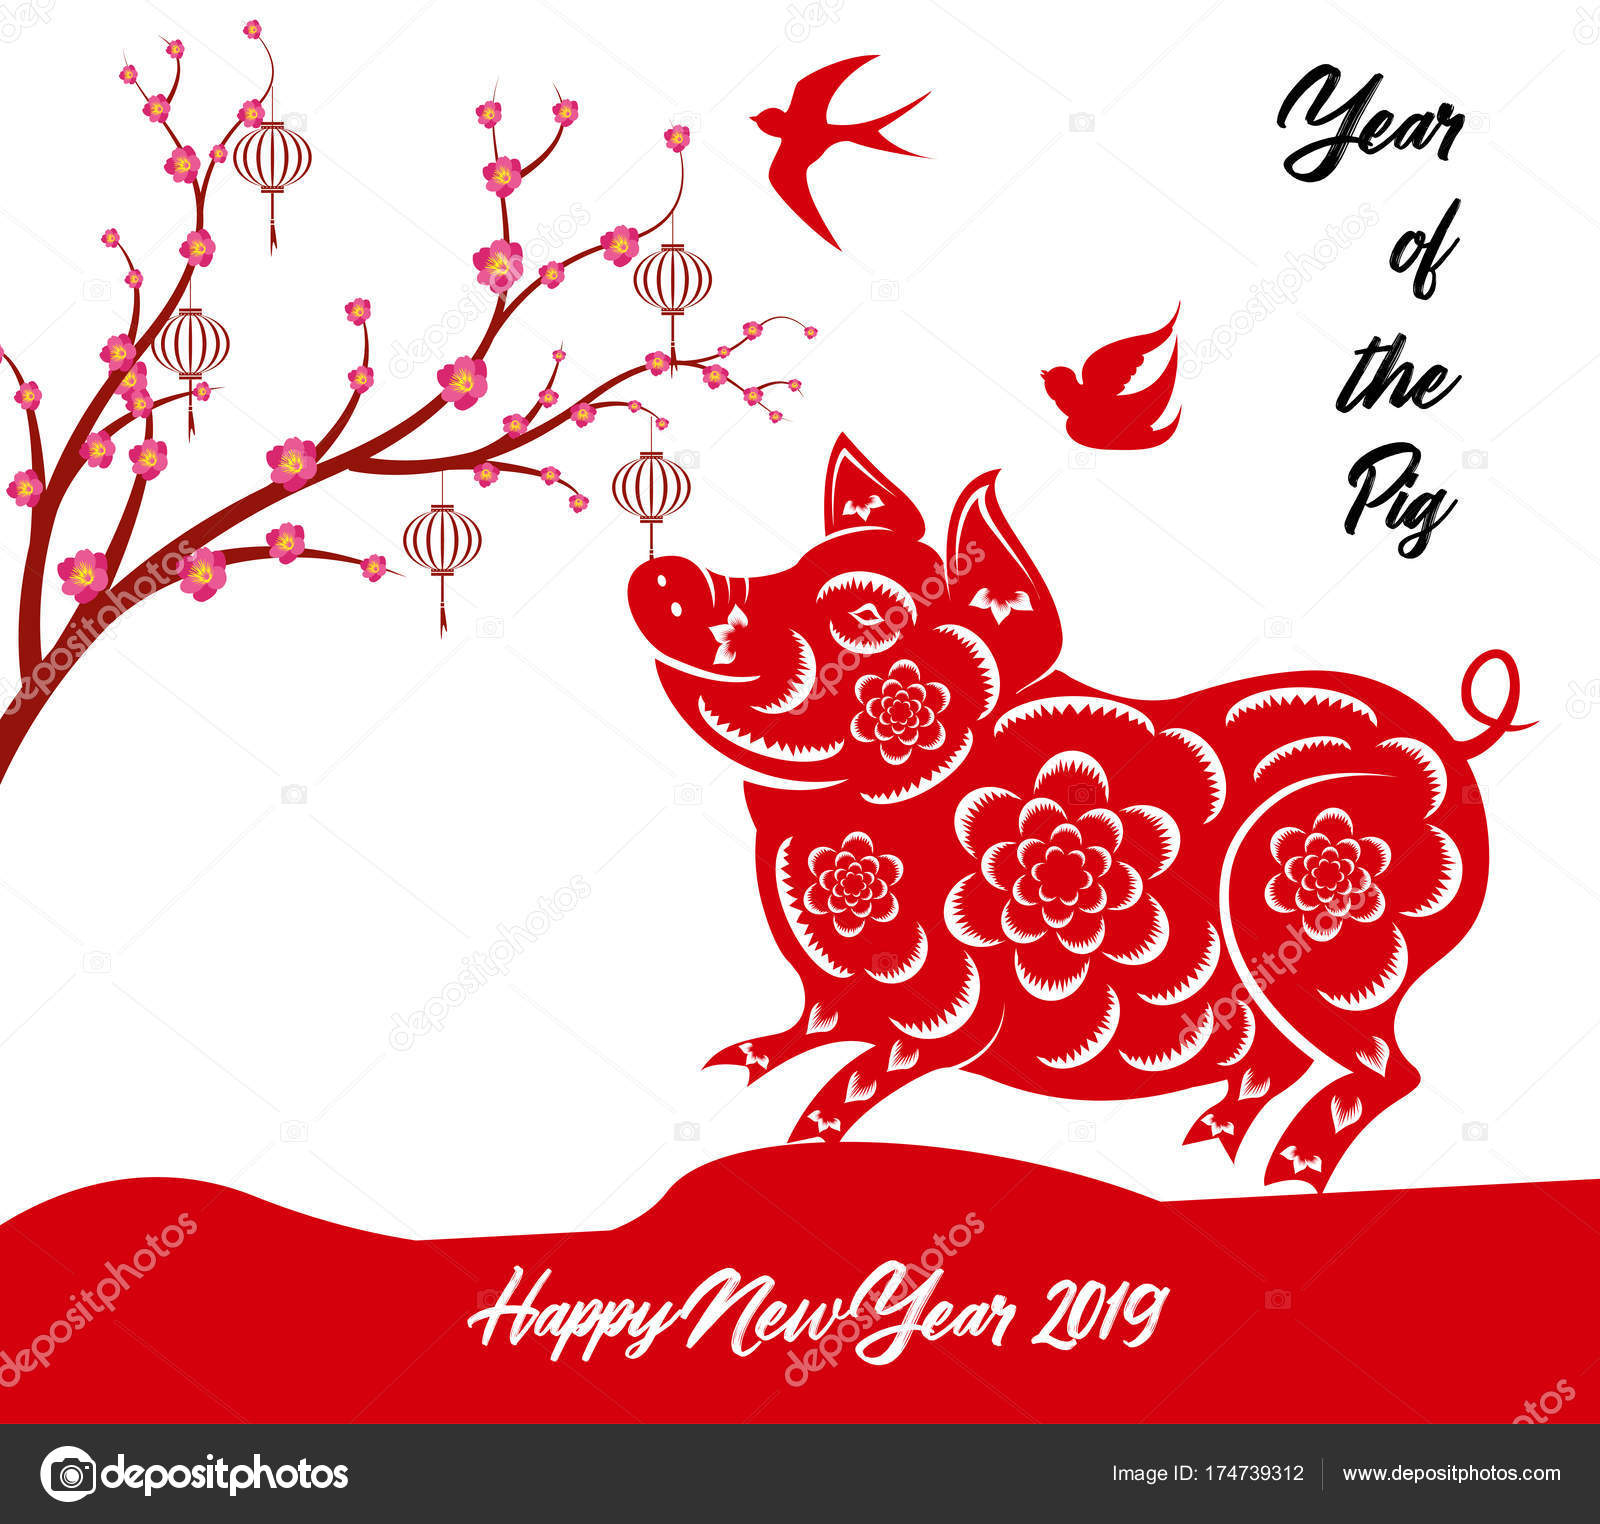 Chinese New Year Pig Borders Clipart & Clip Art Images #11338.